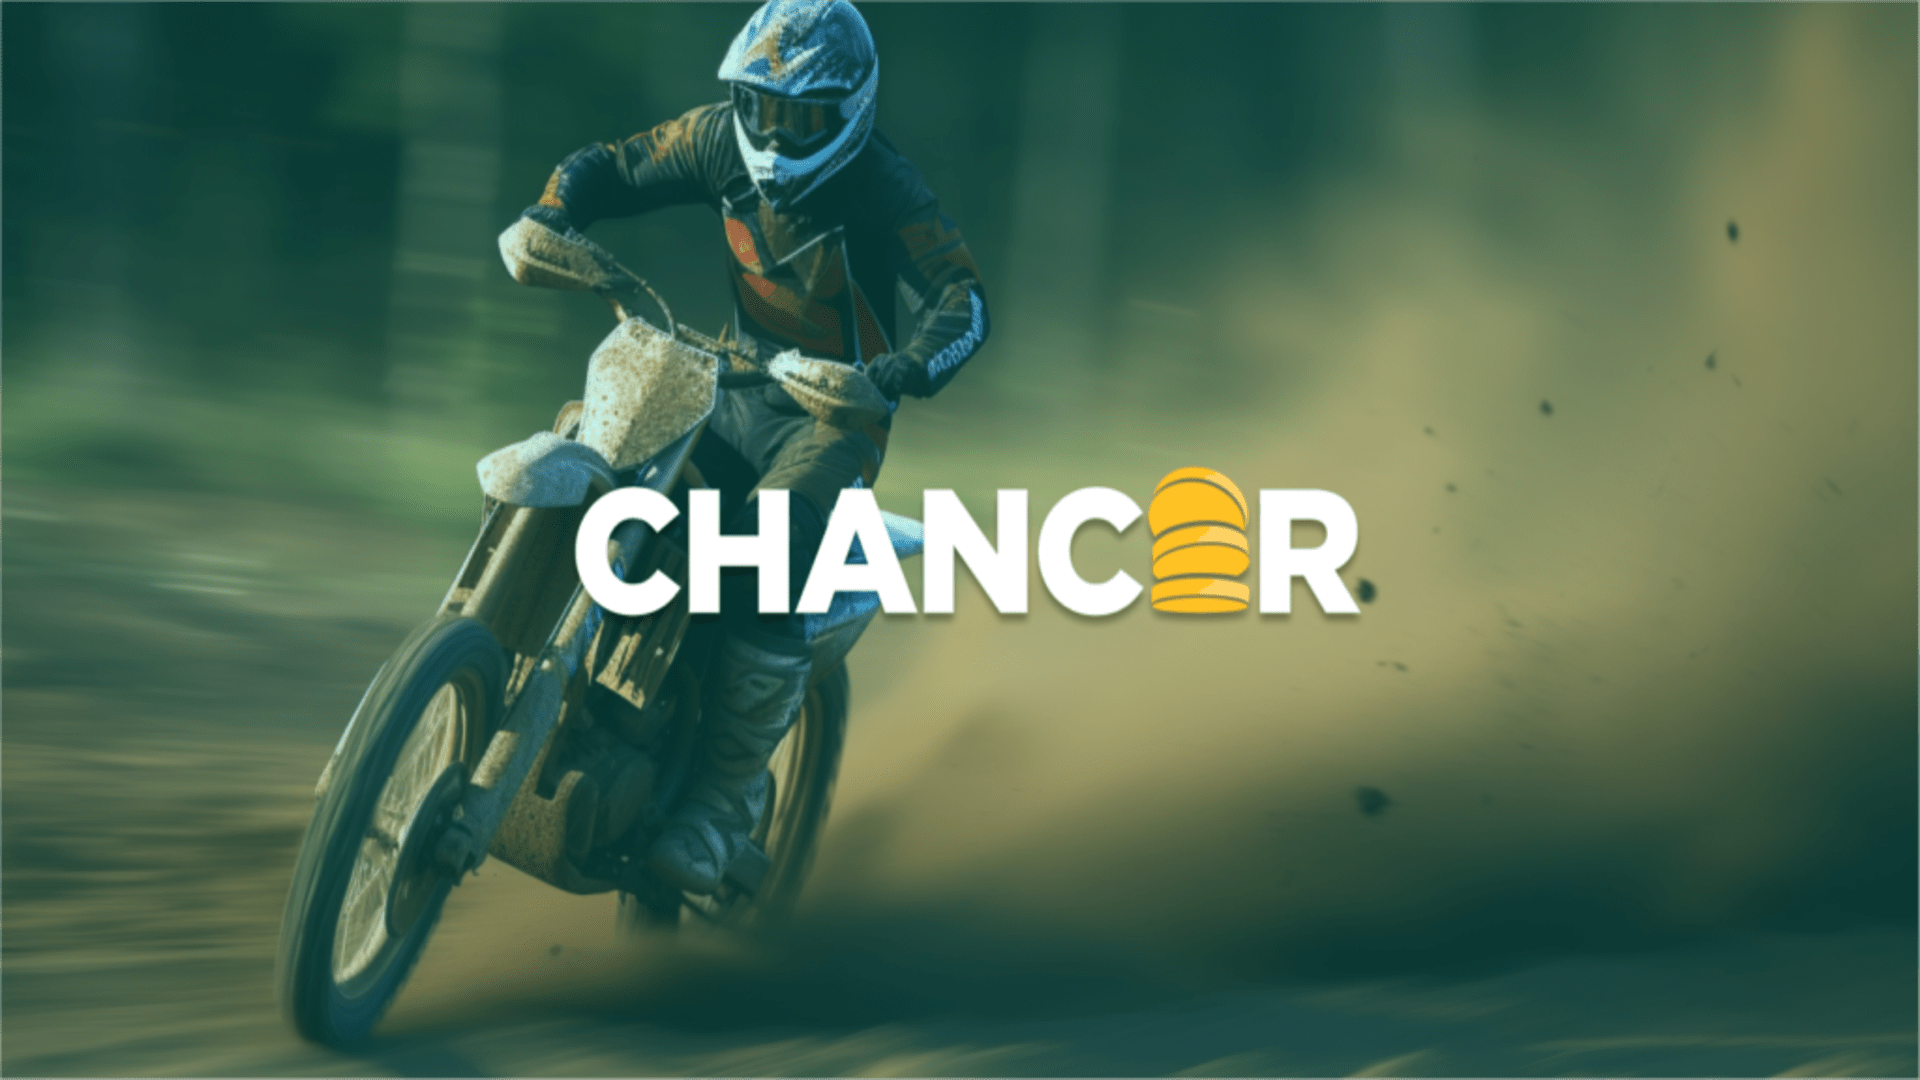 Chancer Crypto Hits $1 Million. Why Is Chancer the Best ICO for September?